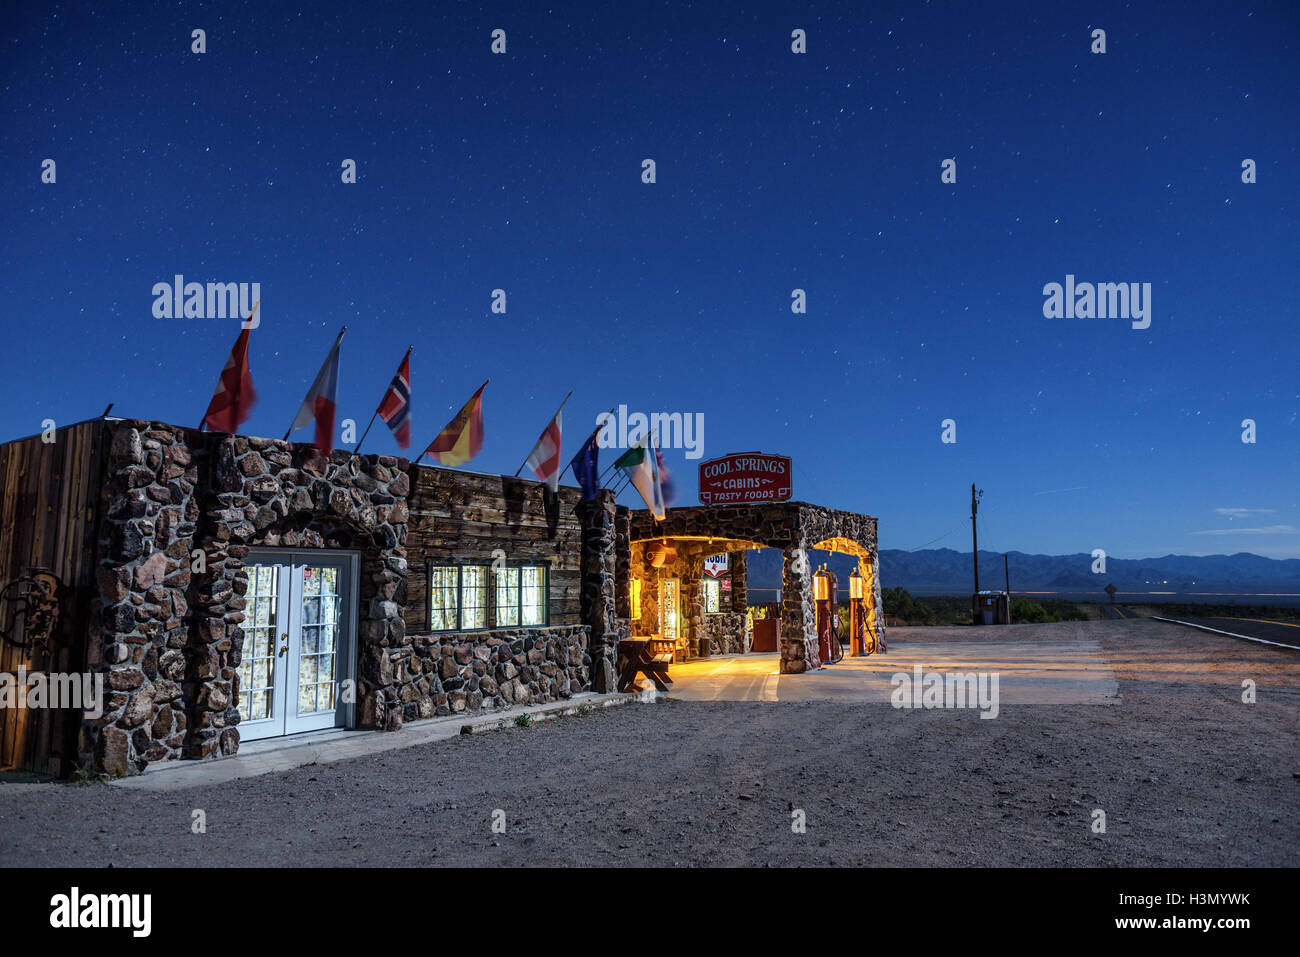 Night sky with many stars above rebuilt Cool Springs station in the Mojave desert on historic route 66 in Arizona Stock Photo